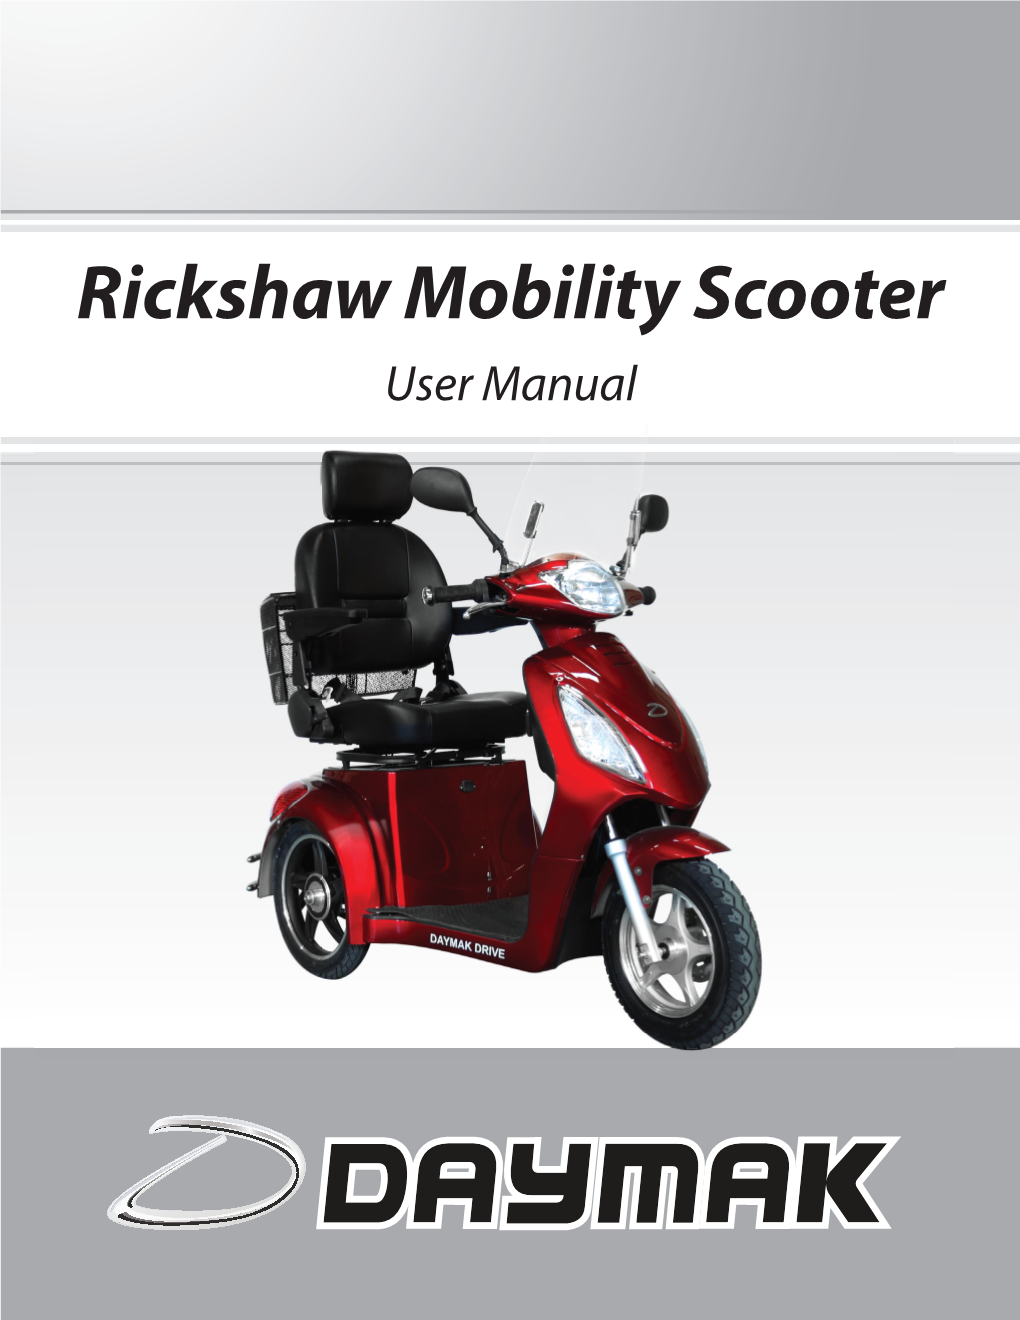 Rickshaw Mobility Scooter User Manual About Daymak